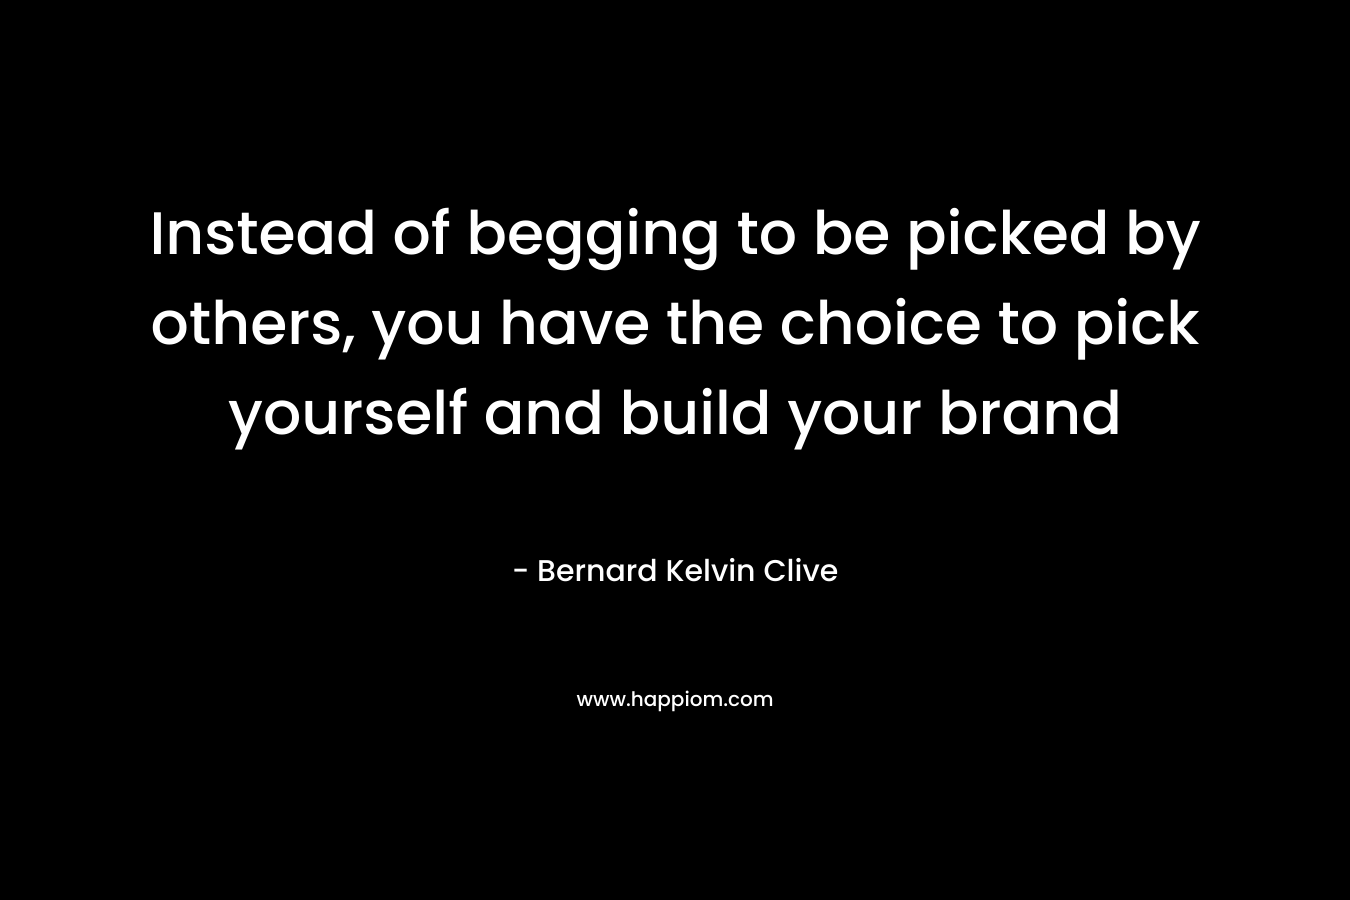 Instead of begging to be picked by others, you have the choice to pick yourself and build your brand – Bernard Kelvin Clive